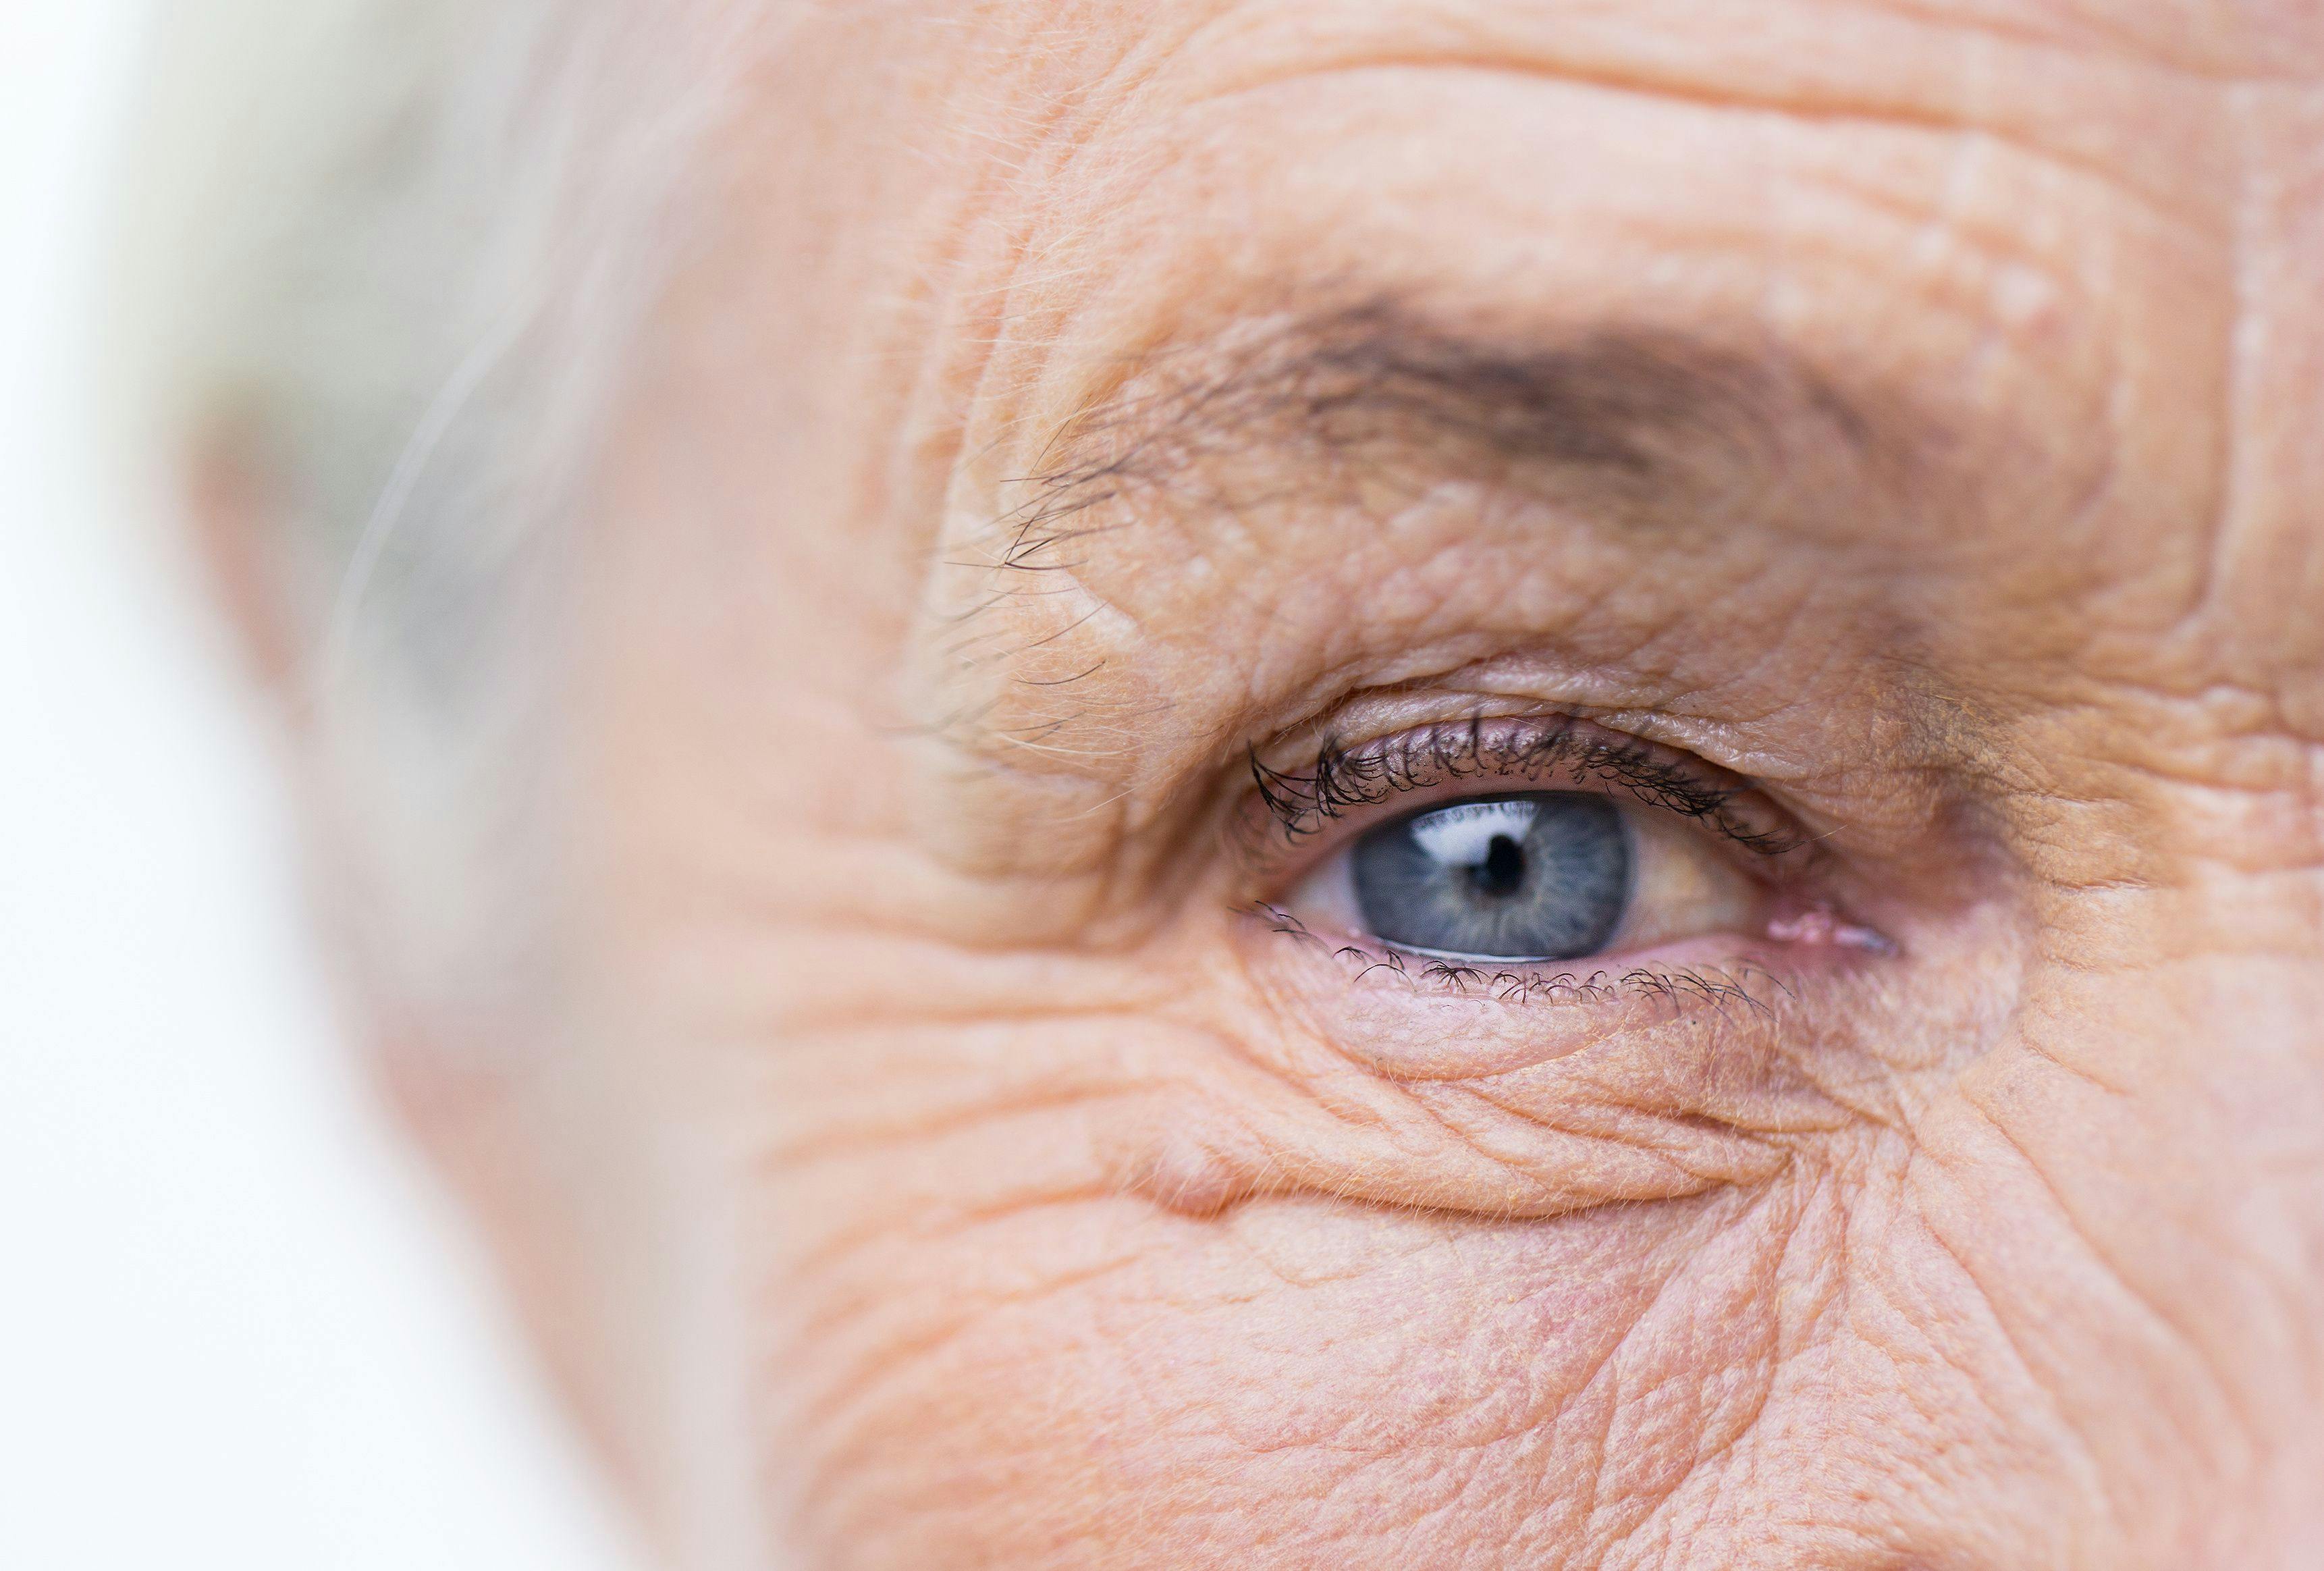 Eye of older person